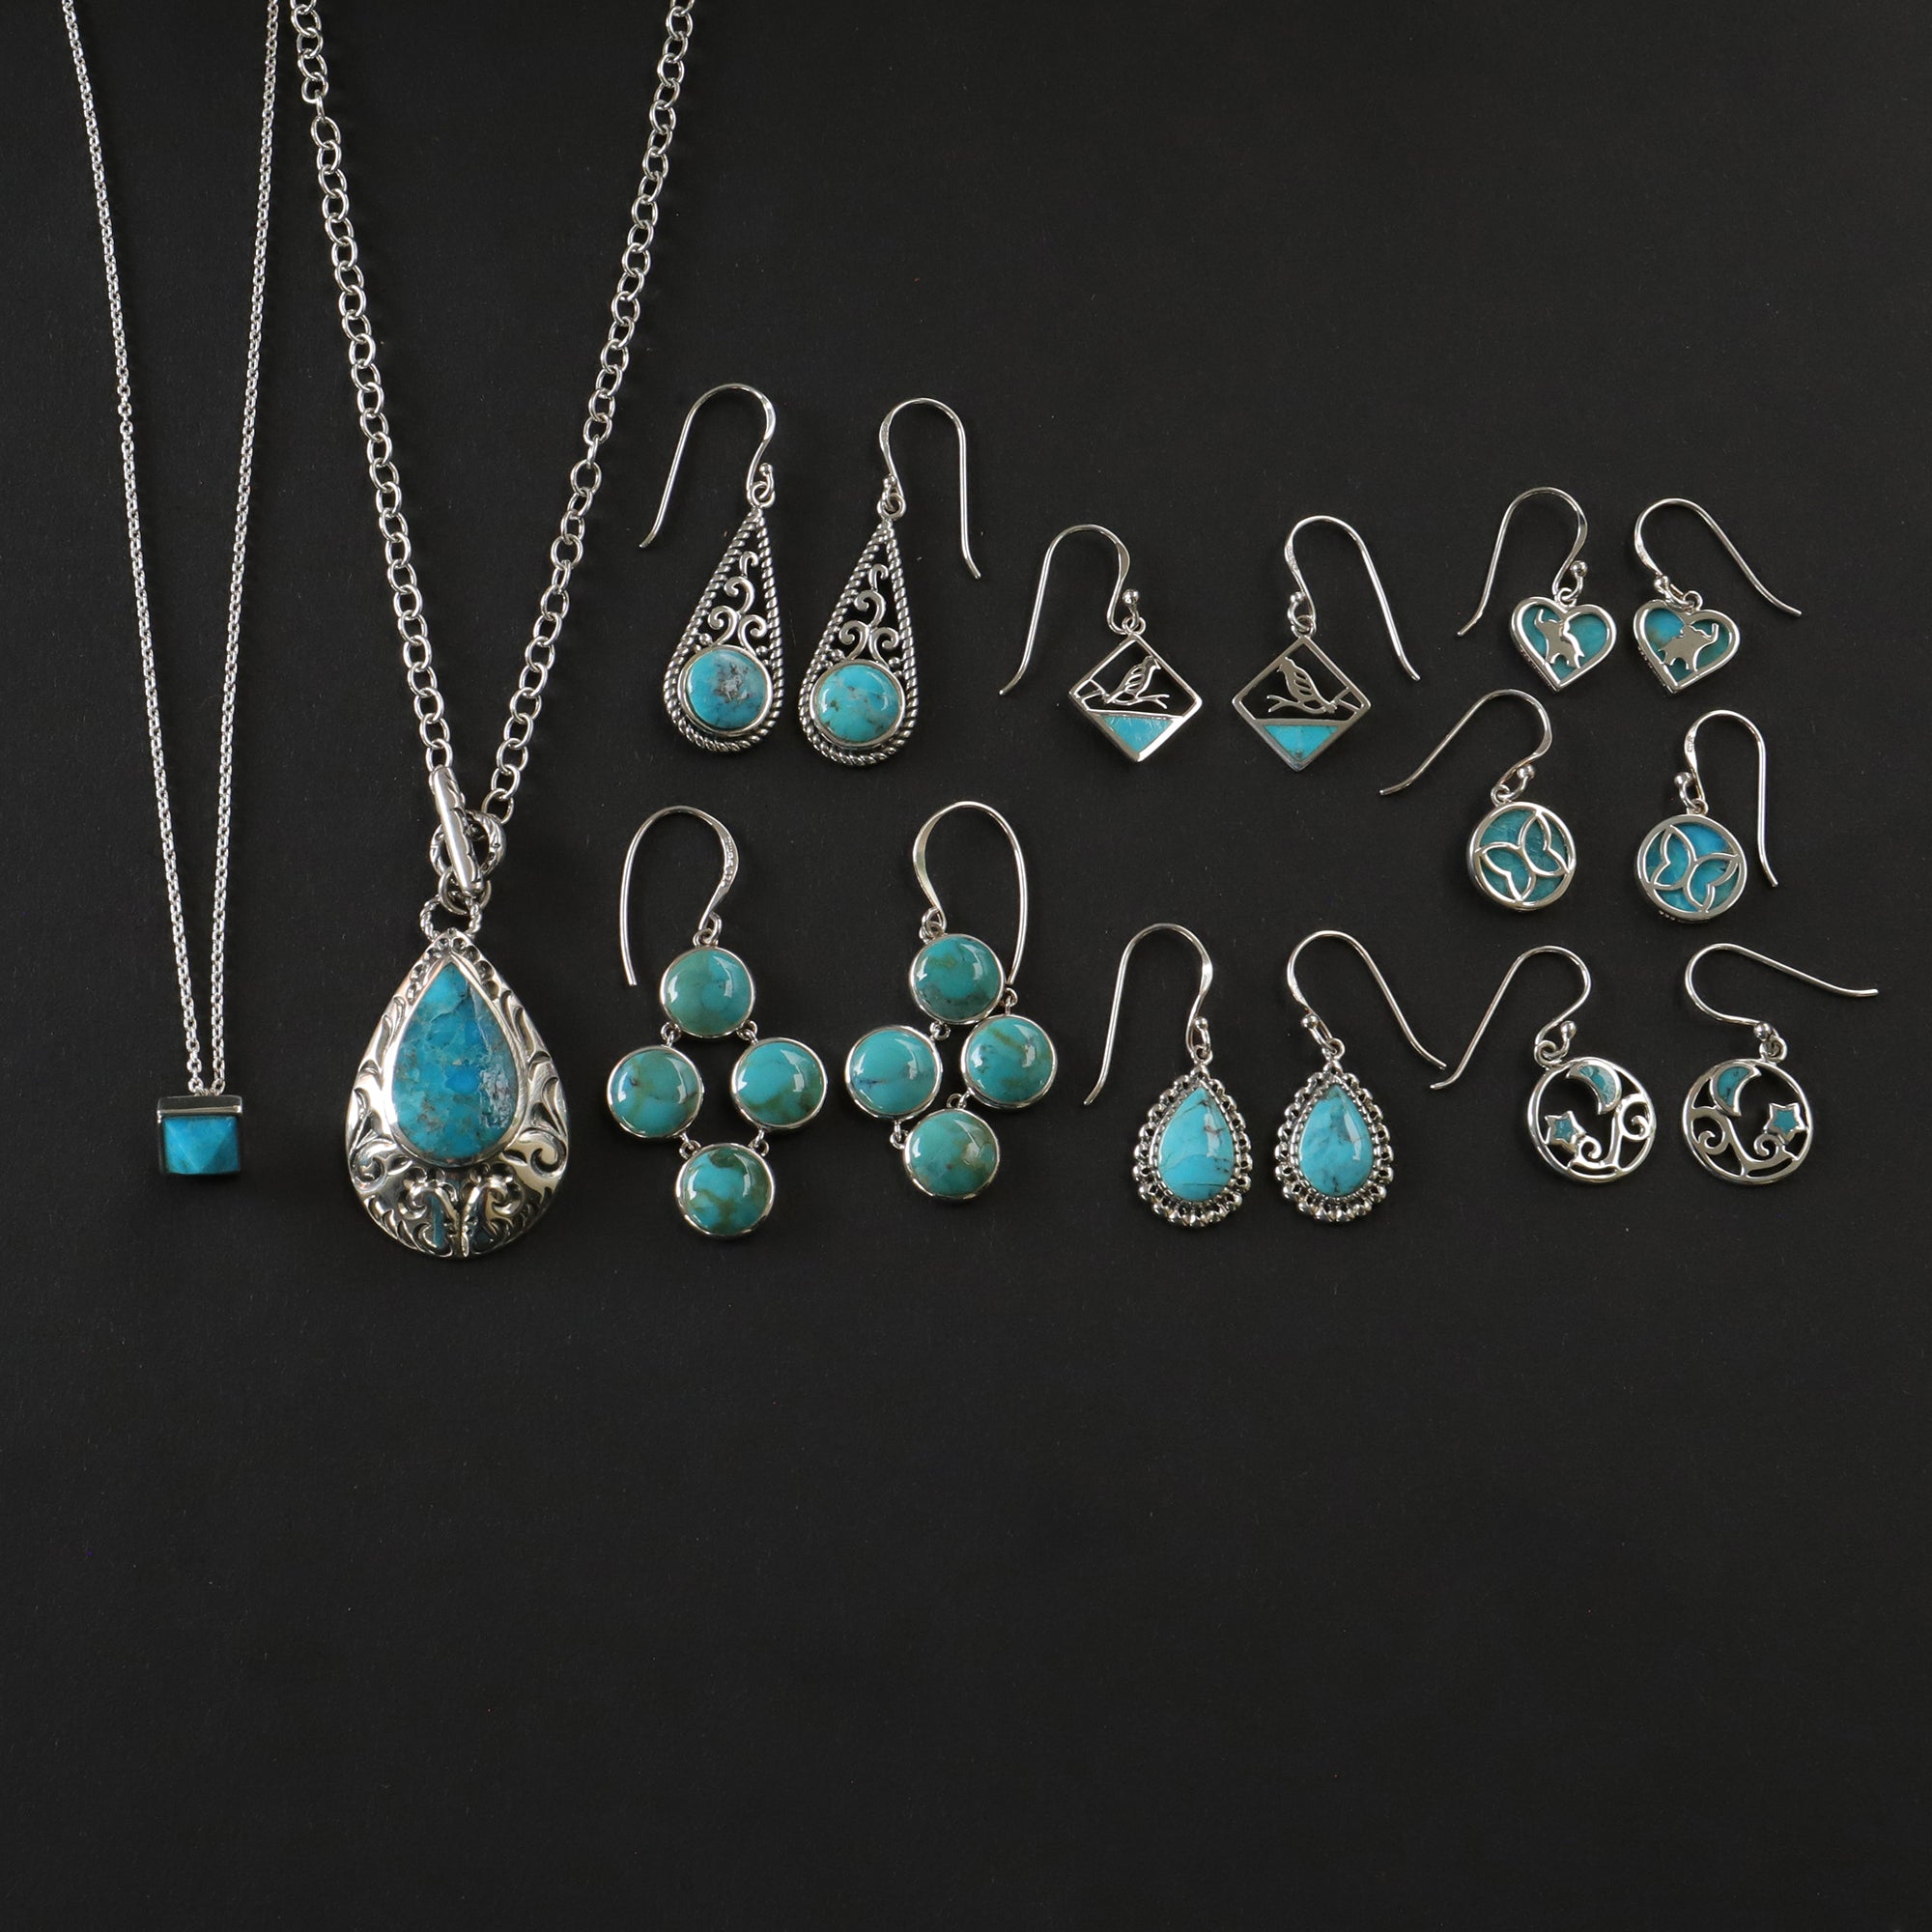 Boma Jewelry Wholesale Blog Vintage Collection with Turquoise